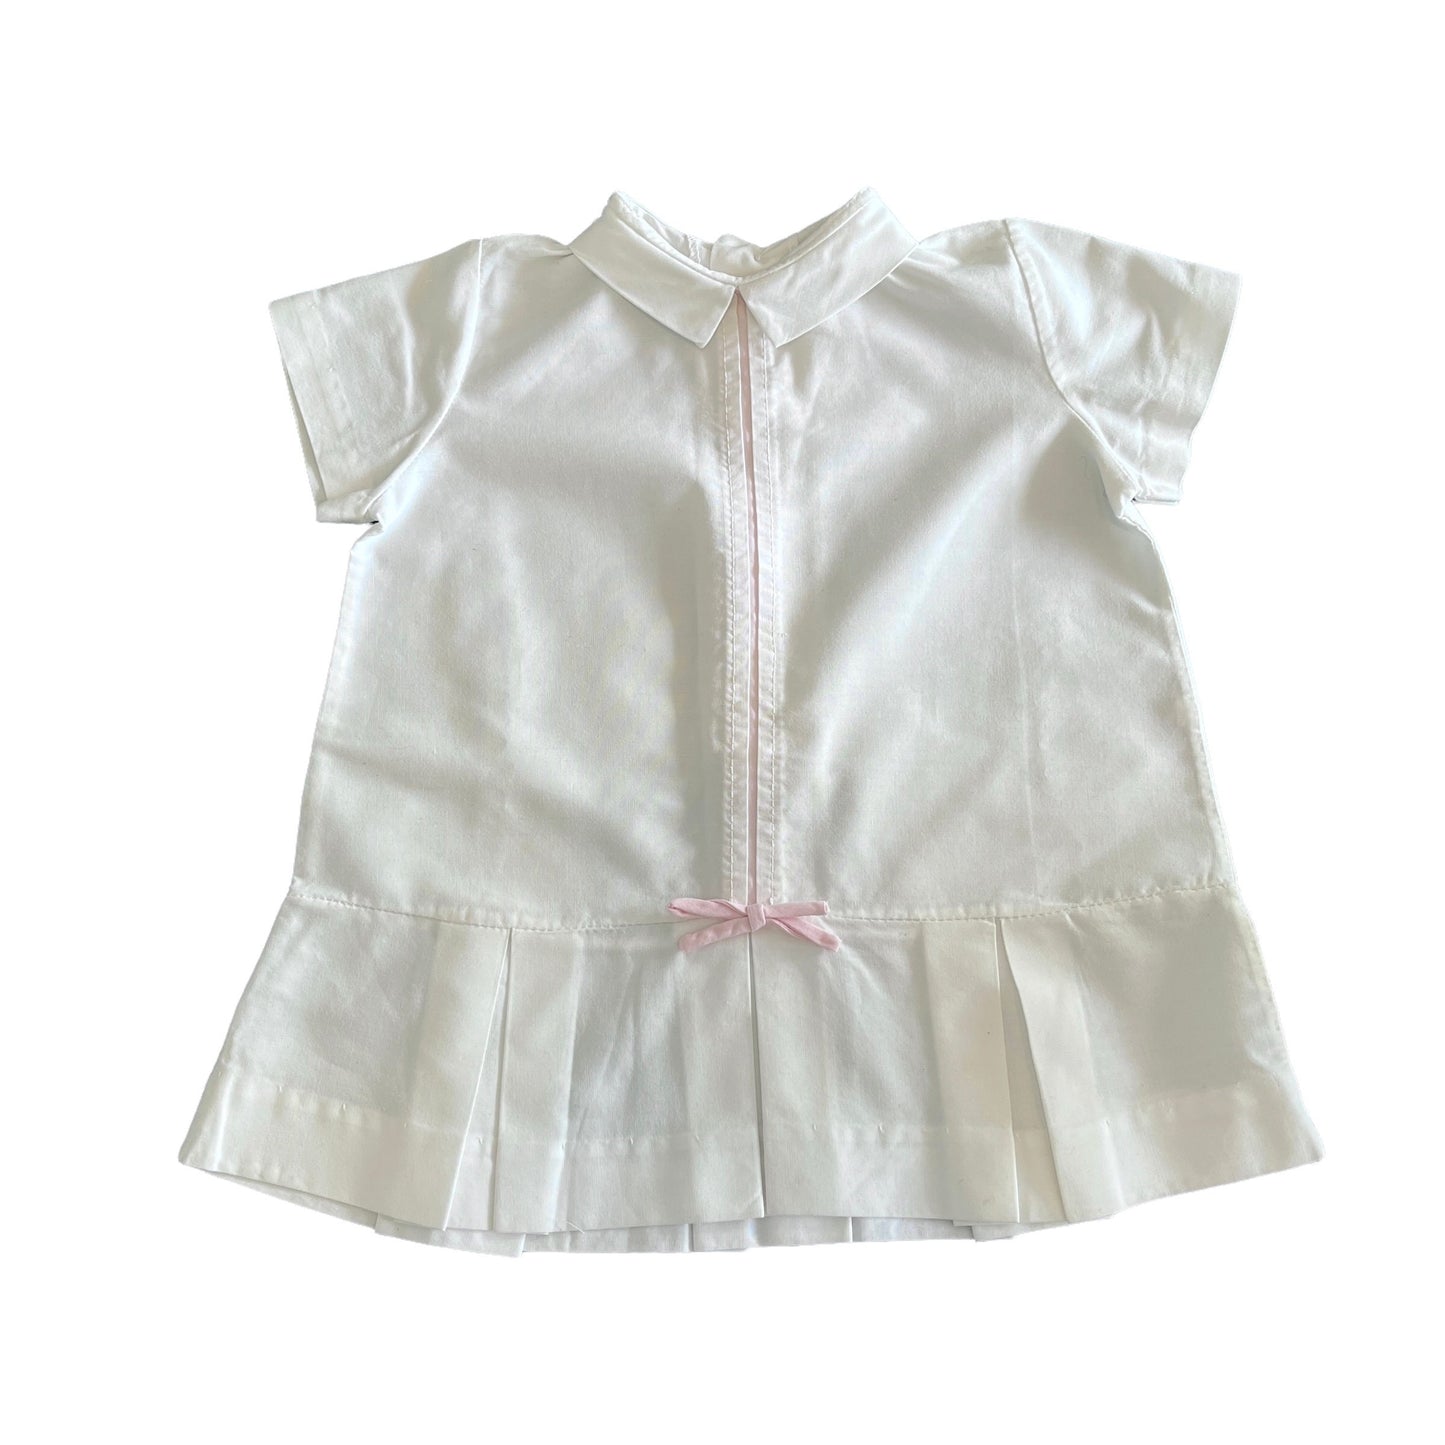 Vintage 1960s White Pleated Dress 6-9 Months